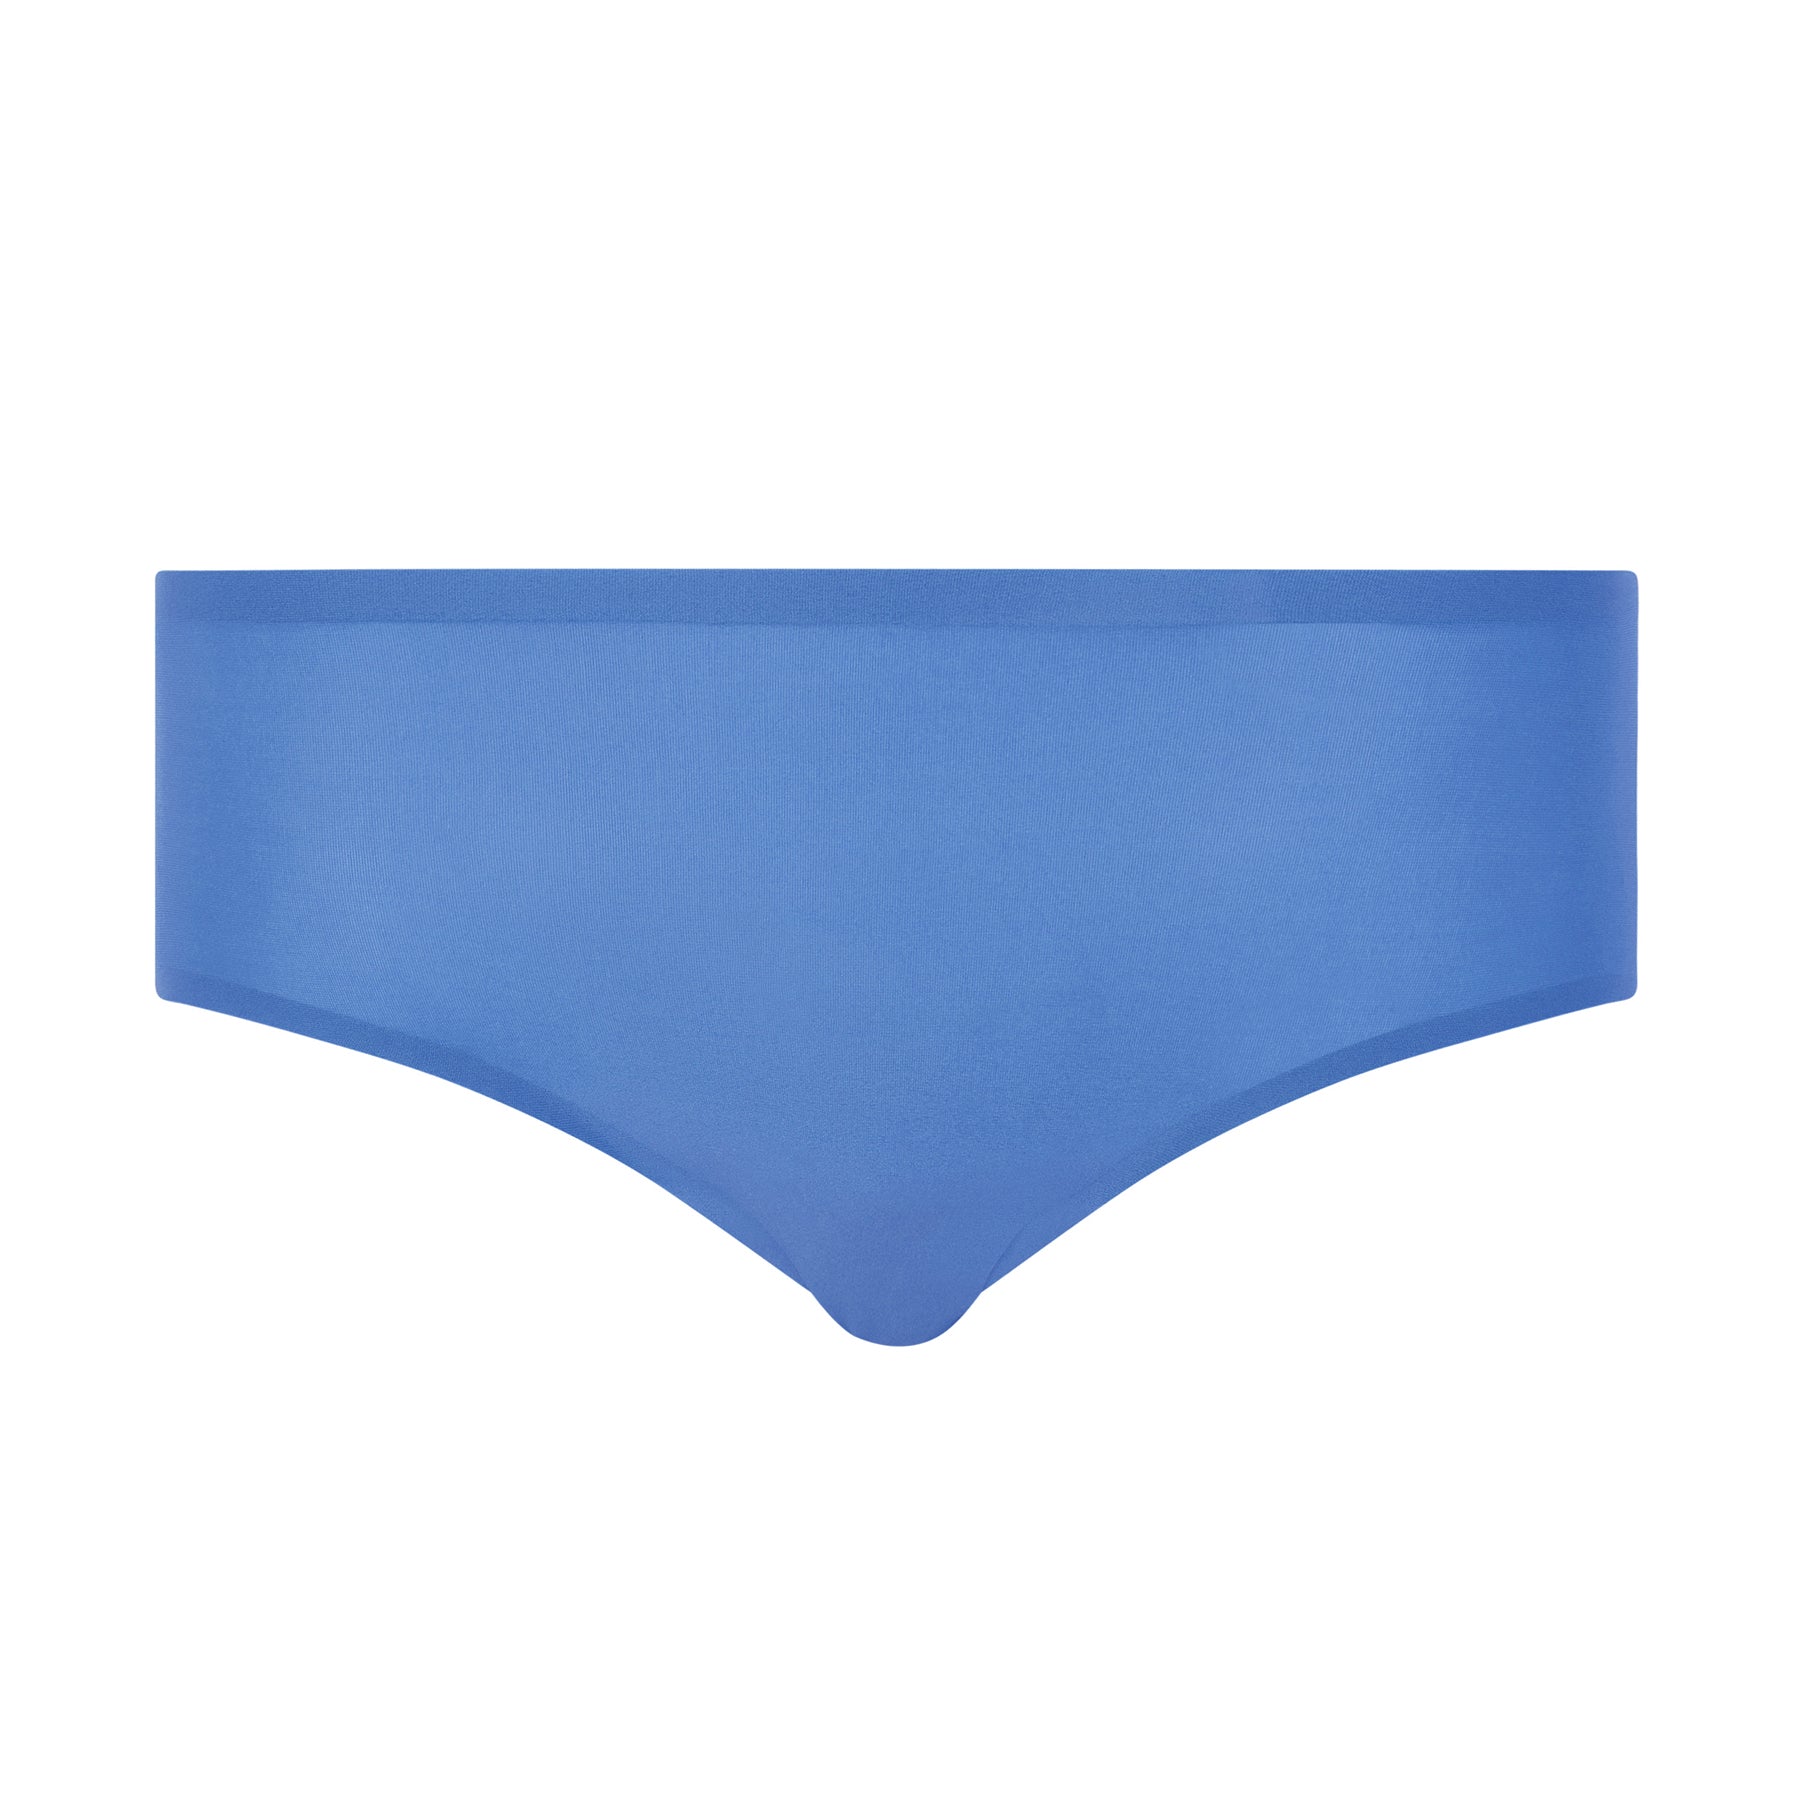 C26440 Chantelle SoftStretch Hipster – Muse Intimates